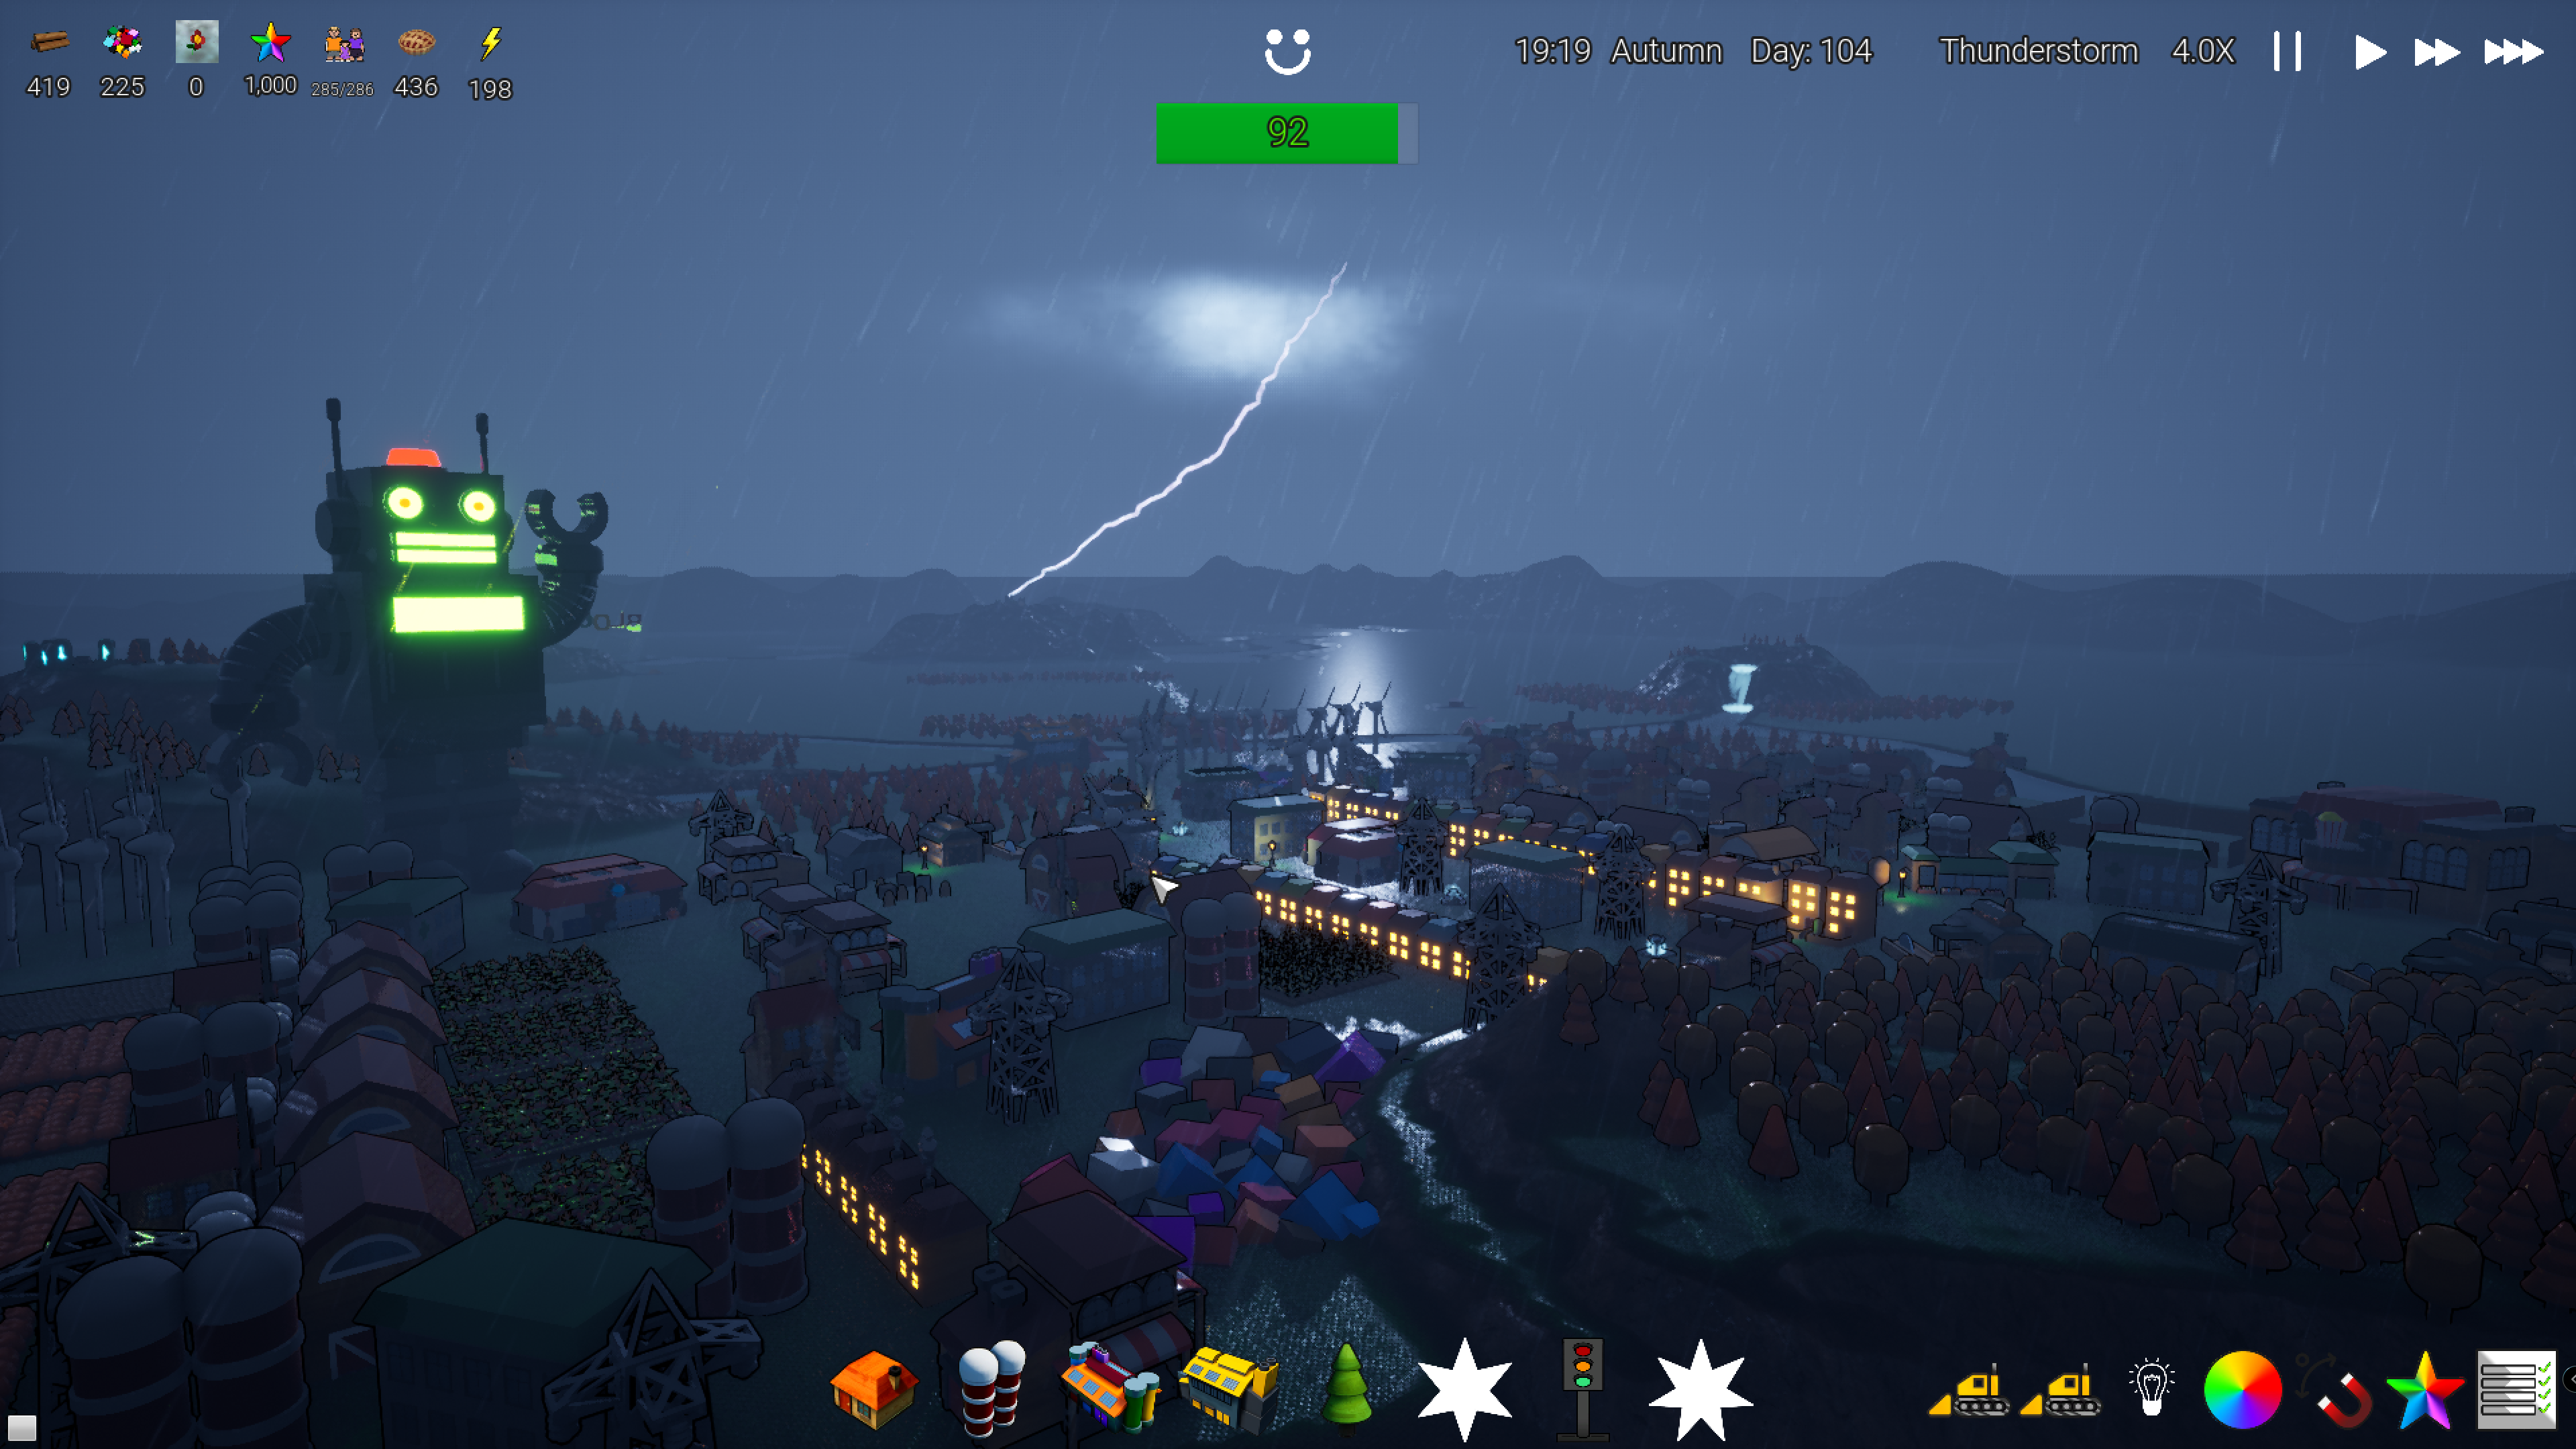 Lighting and thunderstorms over Blockville